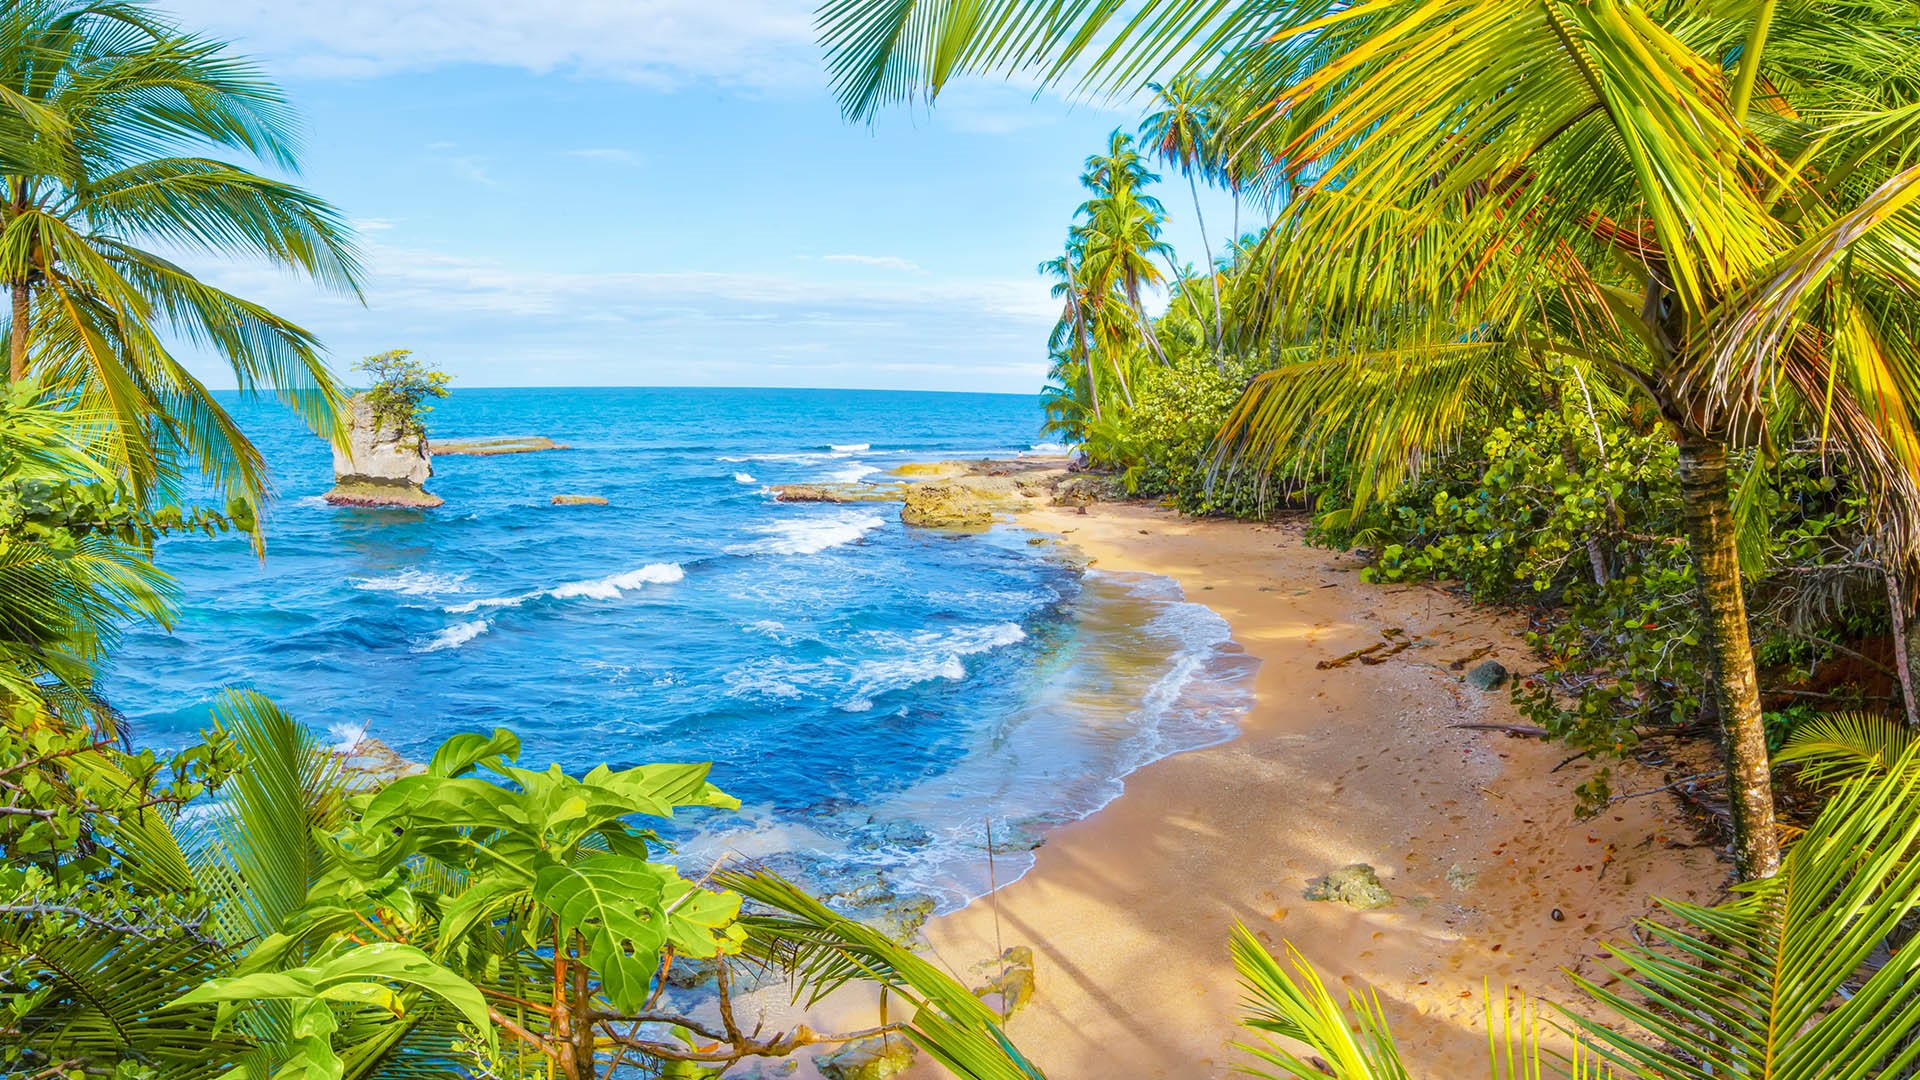 Nature Landscape Far View Trees Sand Rocks Waves Coconuts Horizon Clouds Sky Costa Rica Pacific Ocea 1920x1080